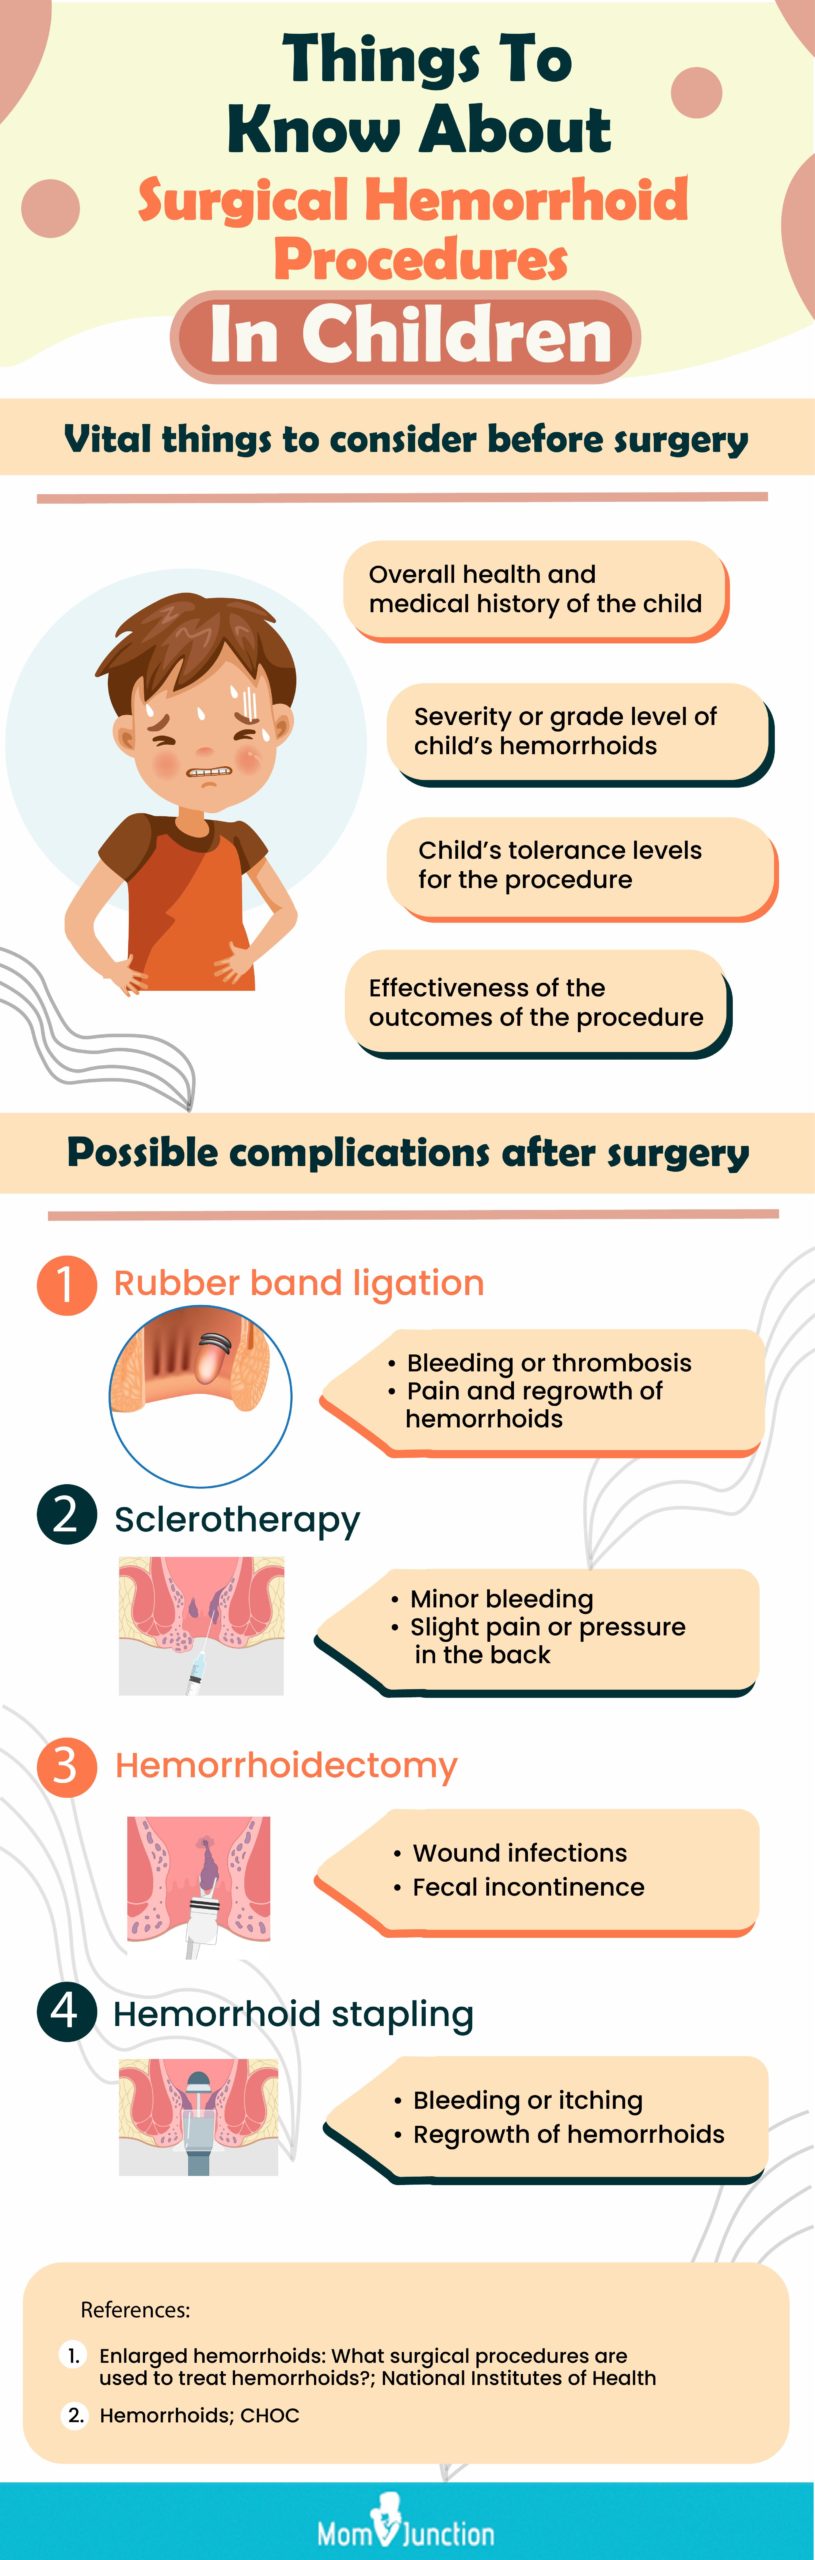 things to know about surgical hemorrhoid procedures in children (infographic)